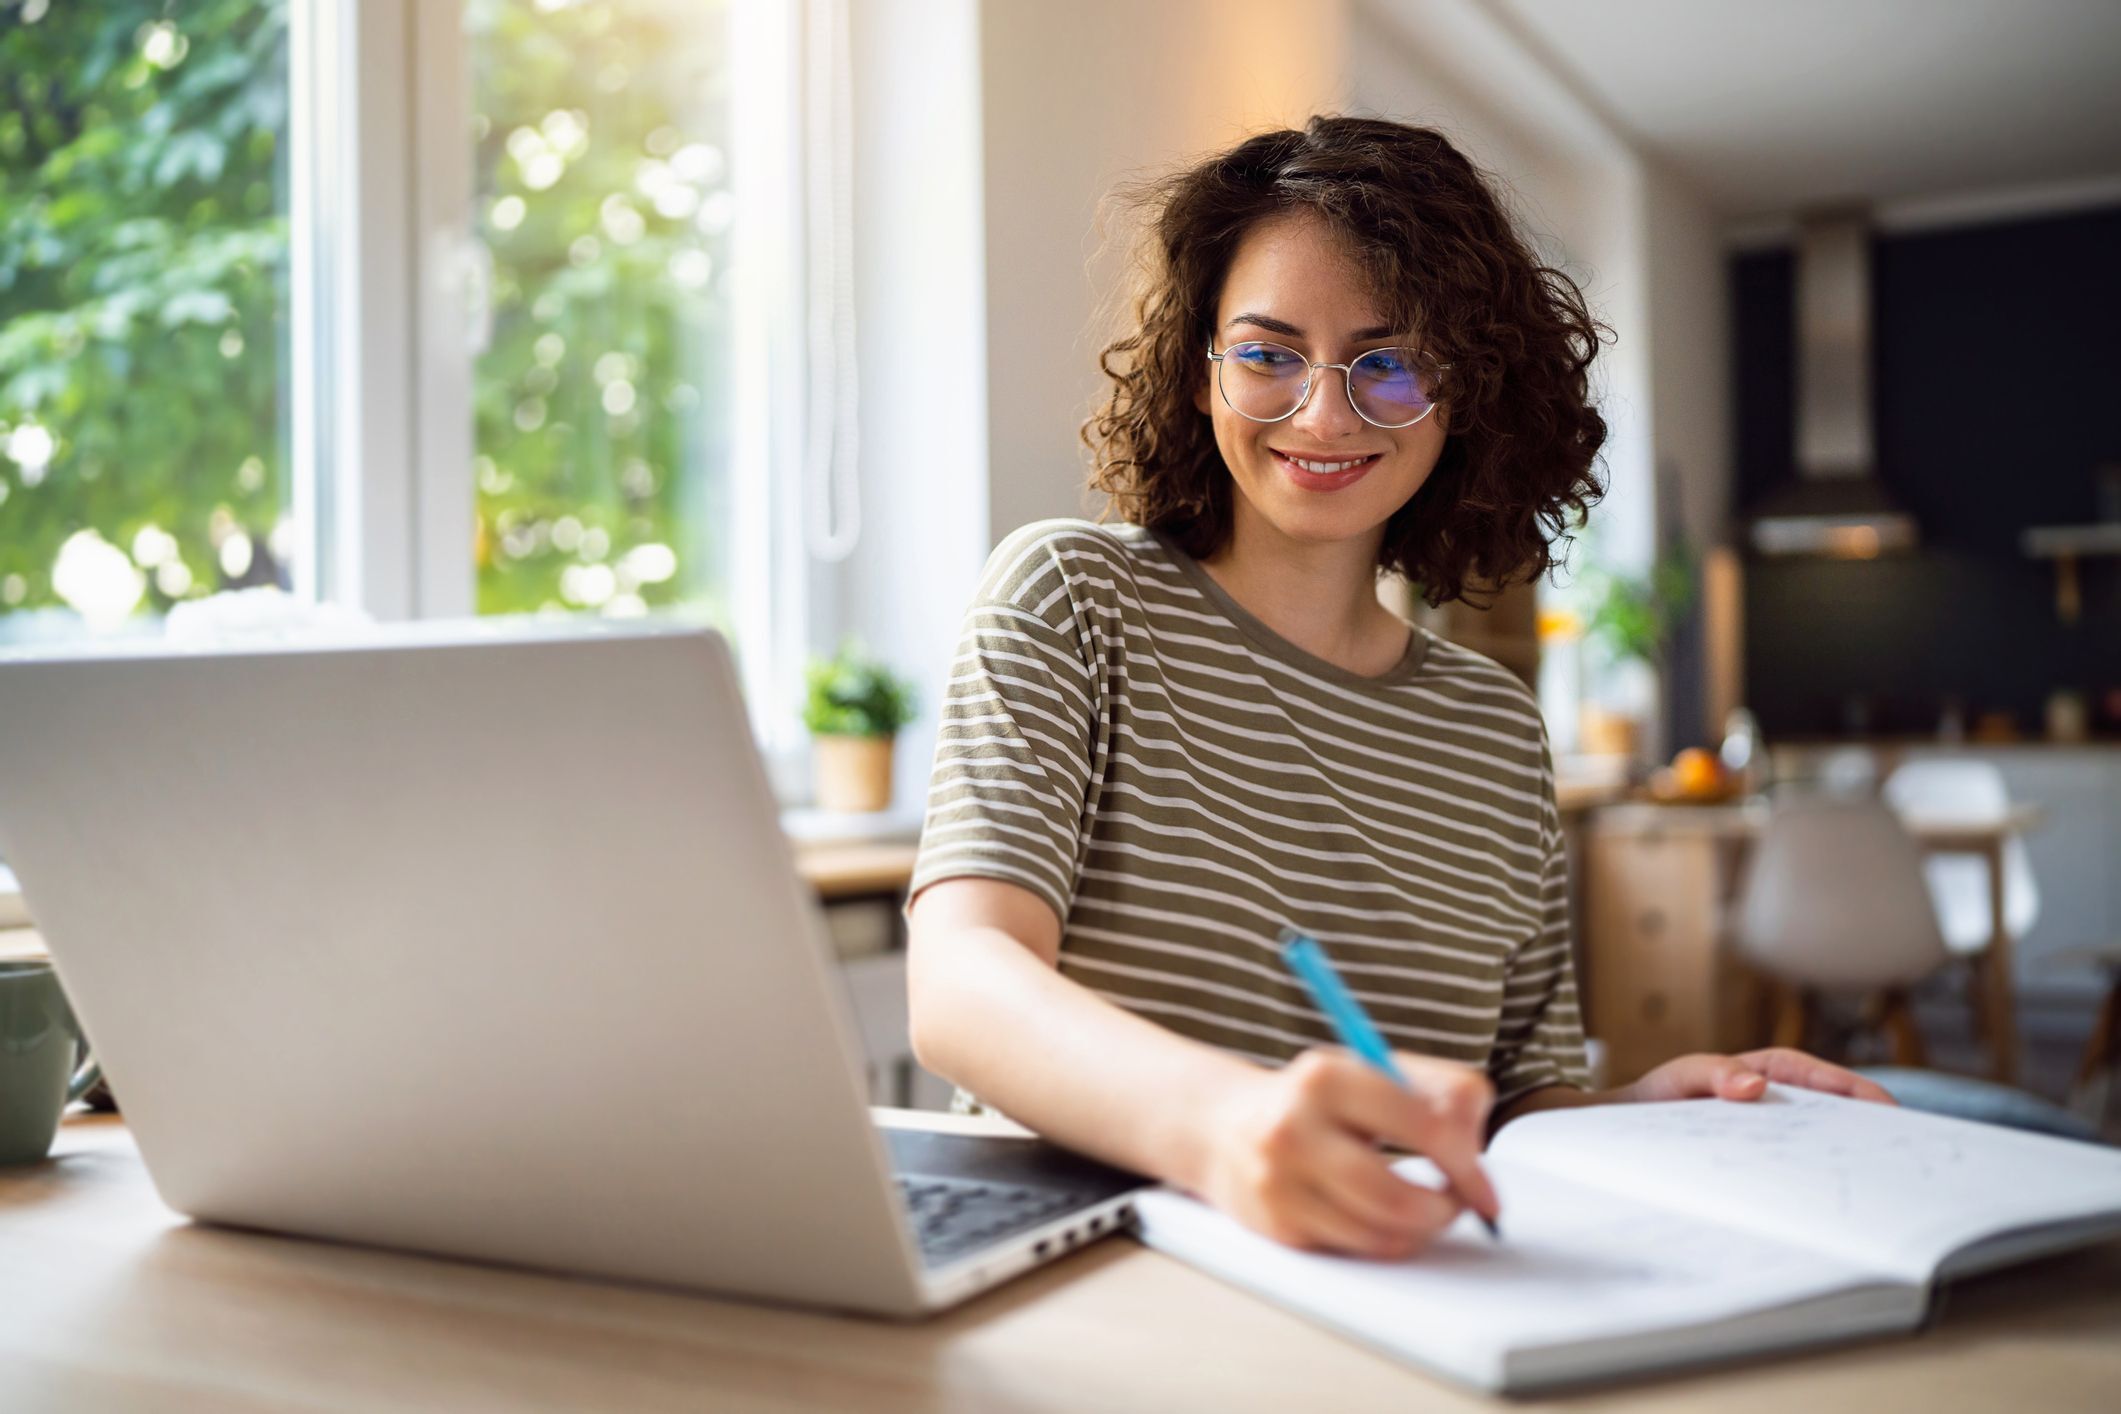 Image Description: an smiling woman looking at an open laptop and taking notes in a notebook